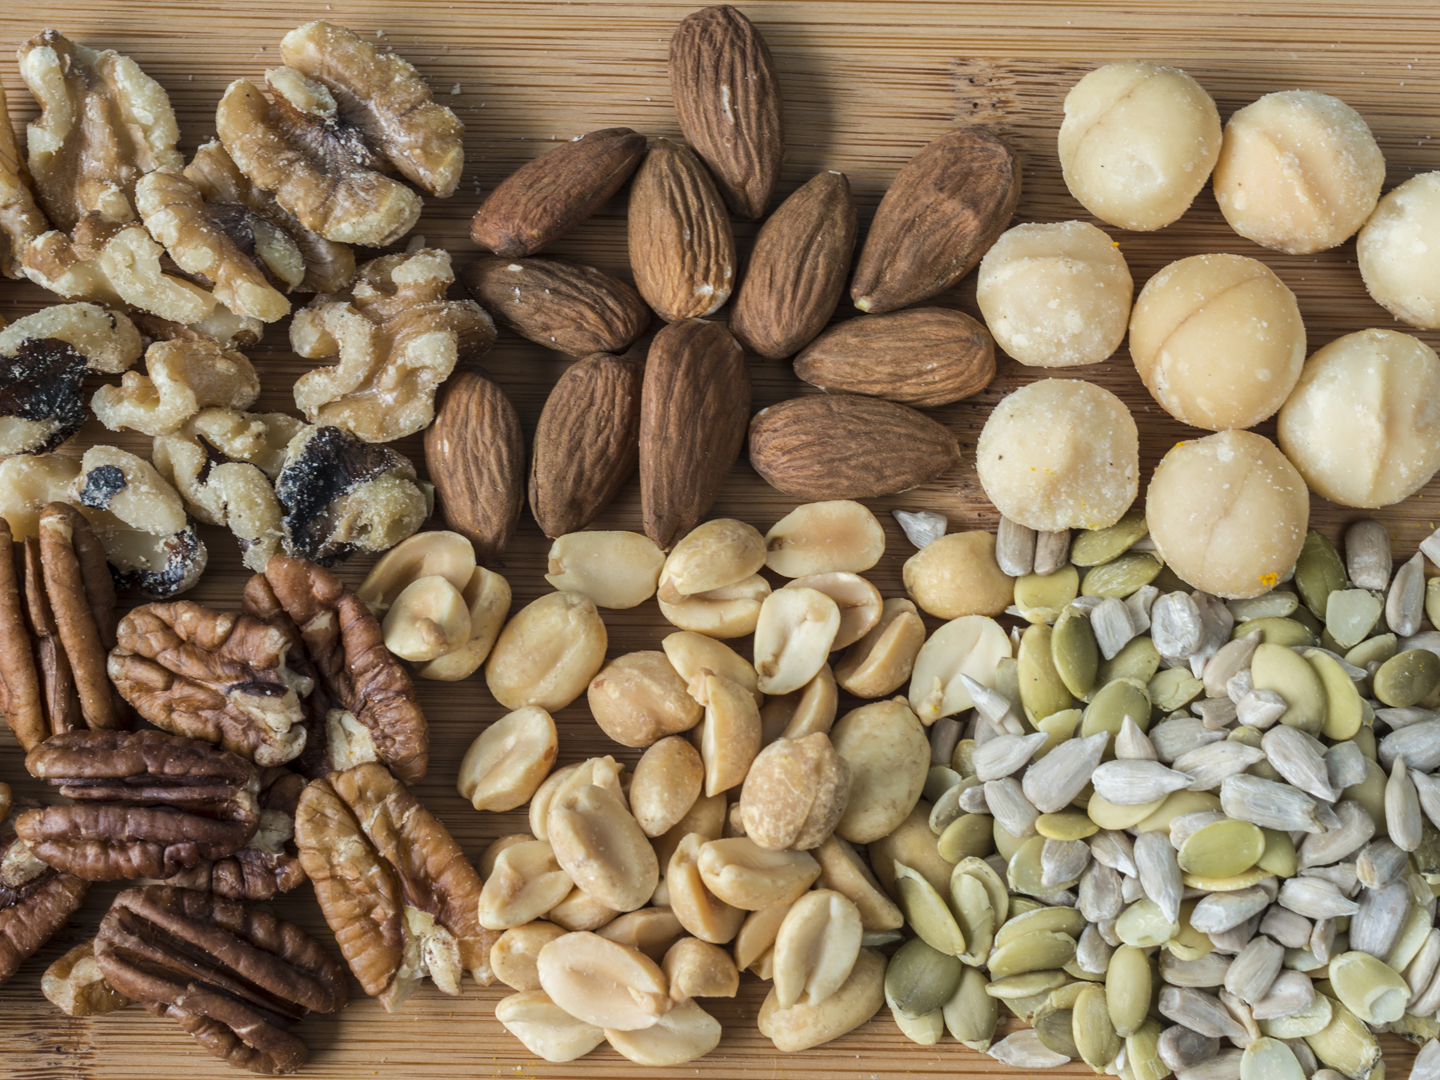 Nuts & Seeds: Preserve Your Memory - The Simple Health & Wellness Blog